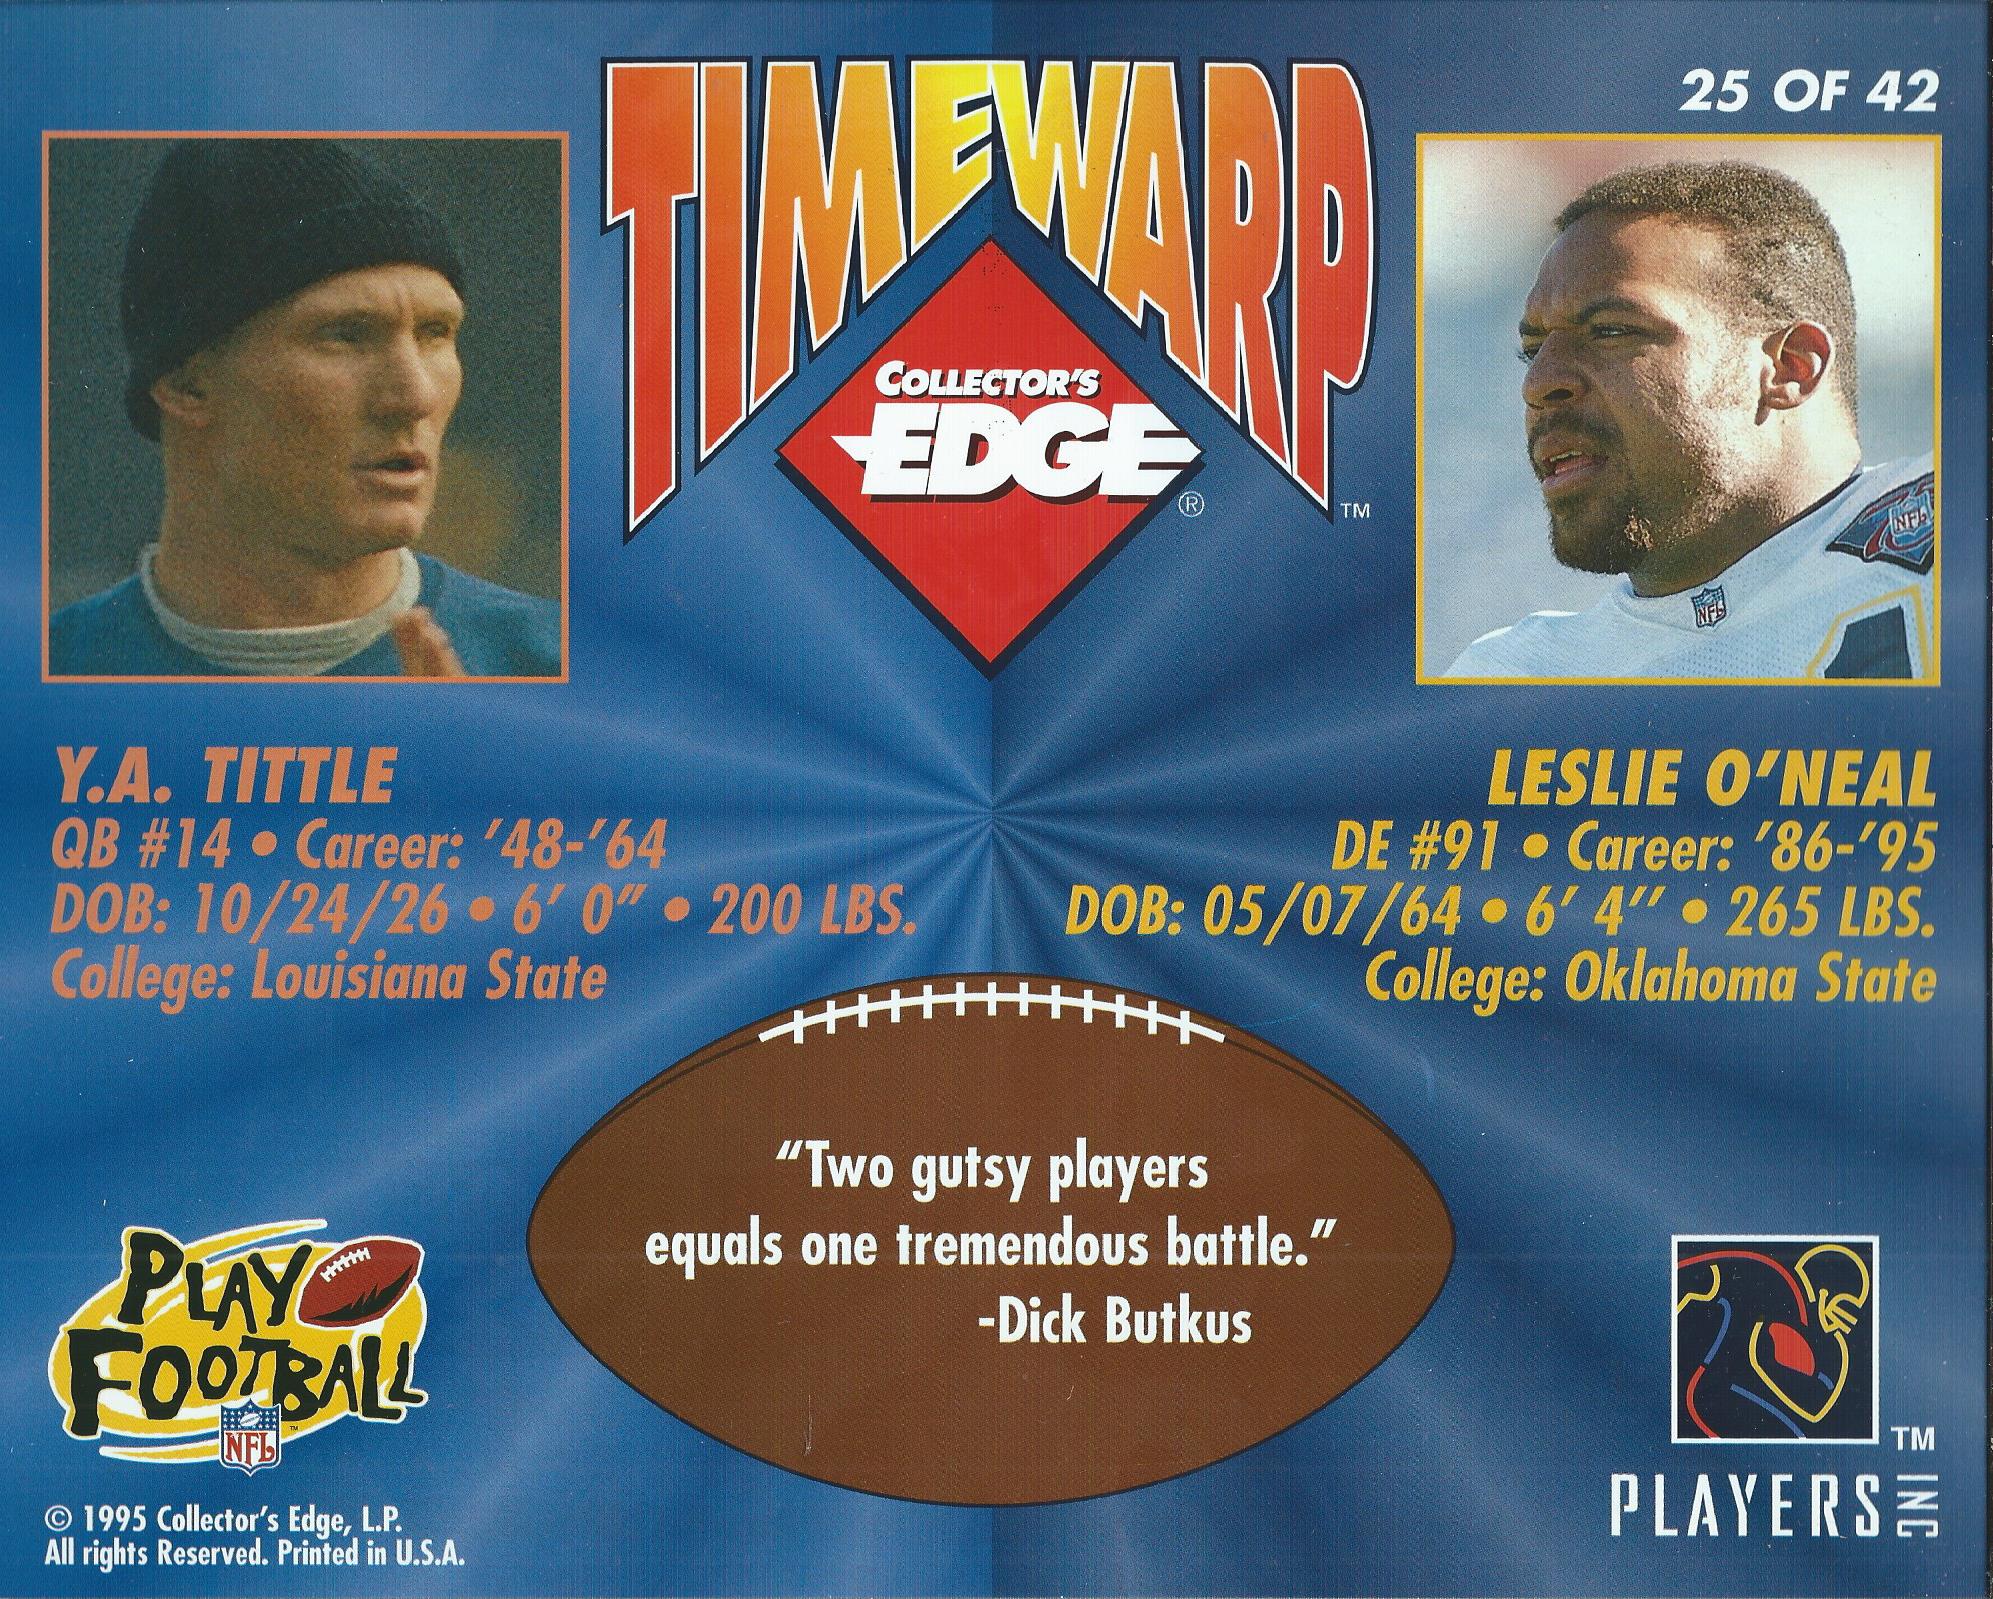 1995 Collector's Edge TimeWarp Jumbos #25 Y.A.Tittle/Leslie O'Neal back image